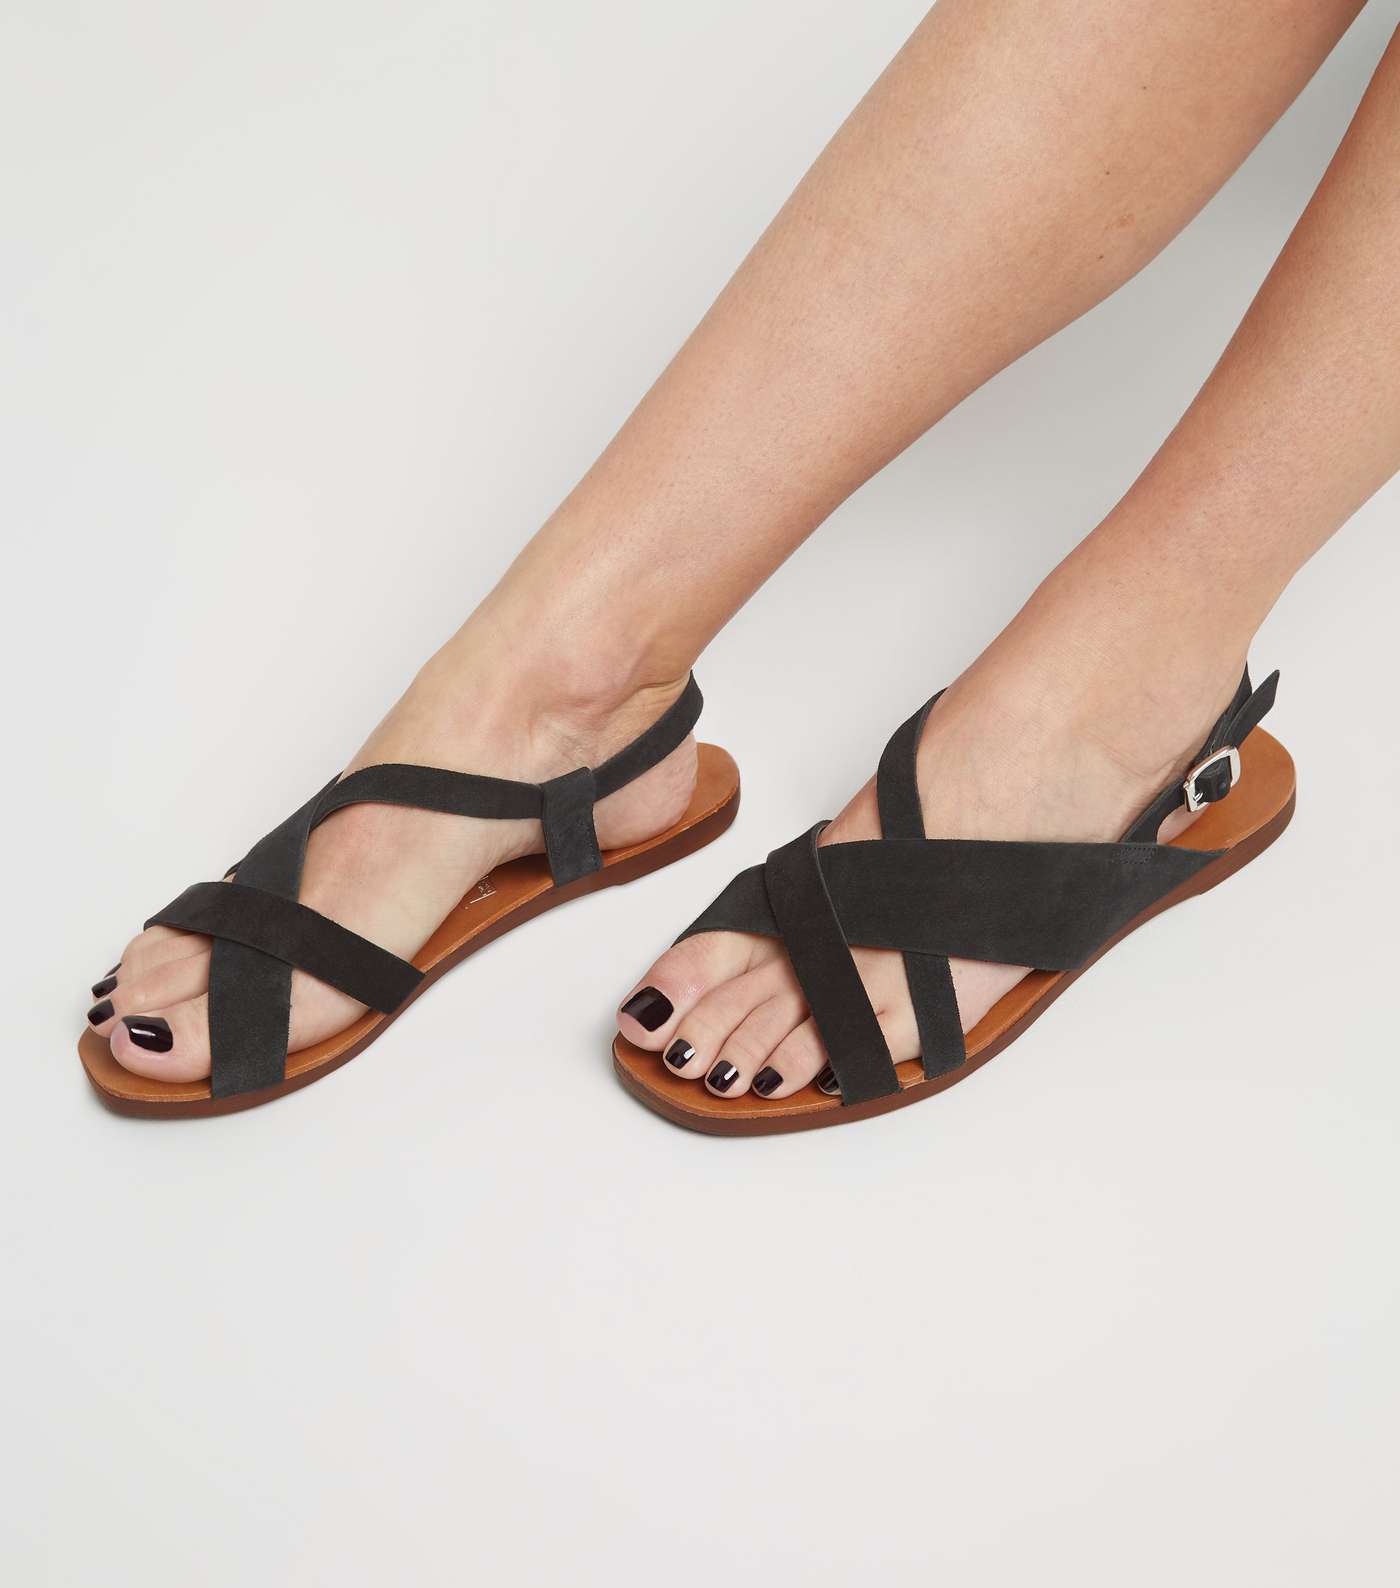 Wide Fit Black Suede Strappy Flat Sandals Image 2